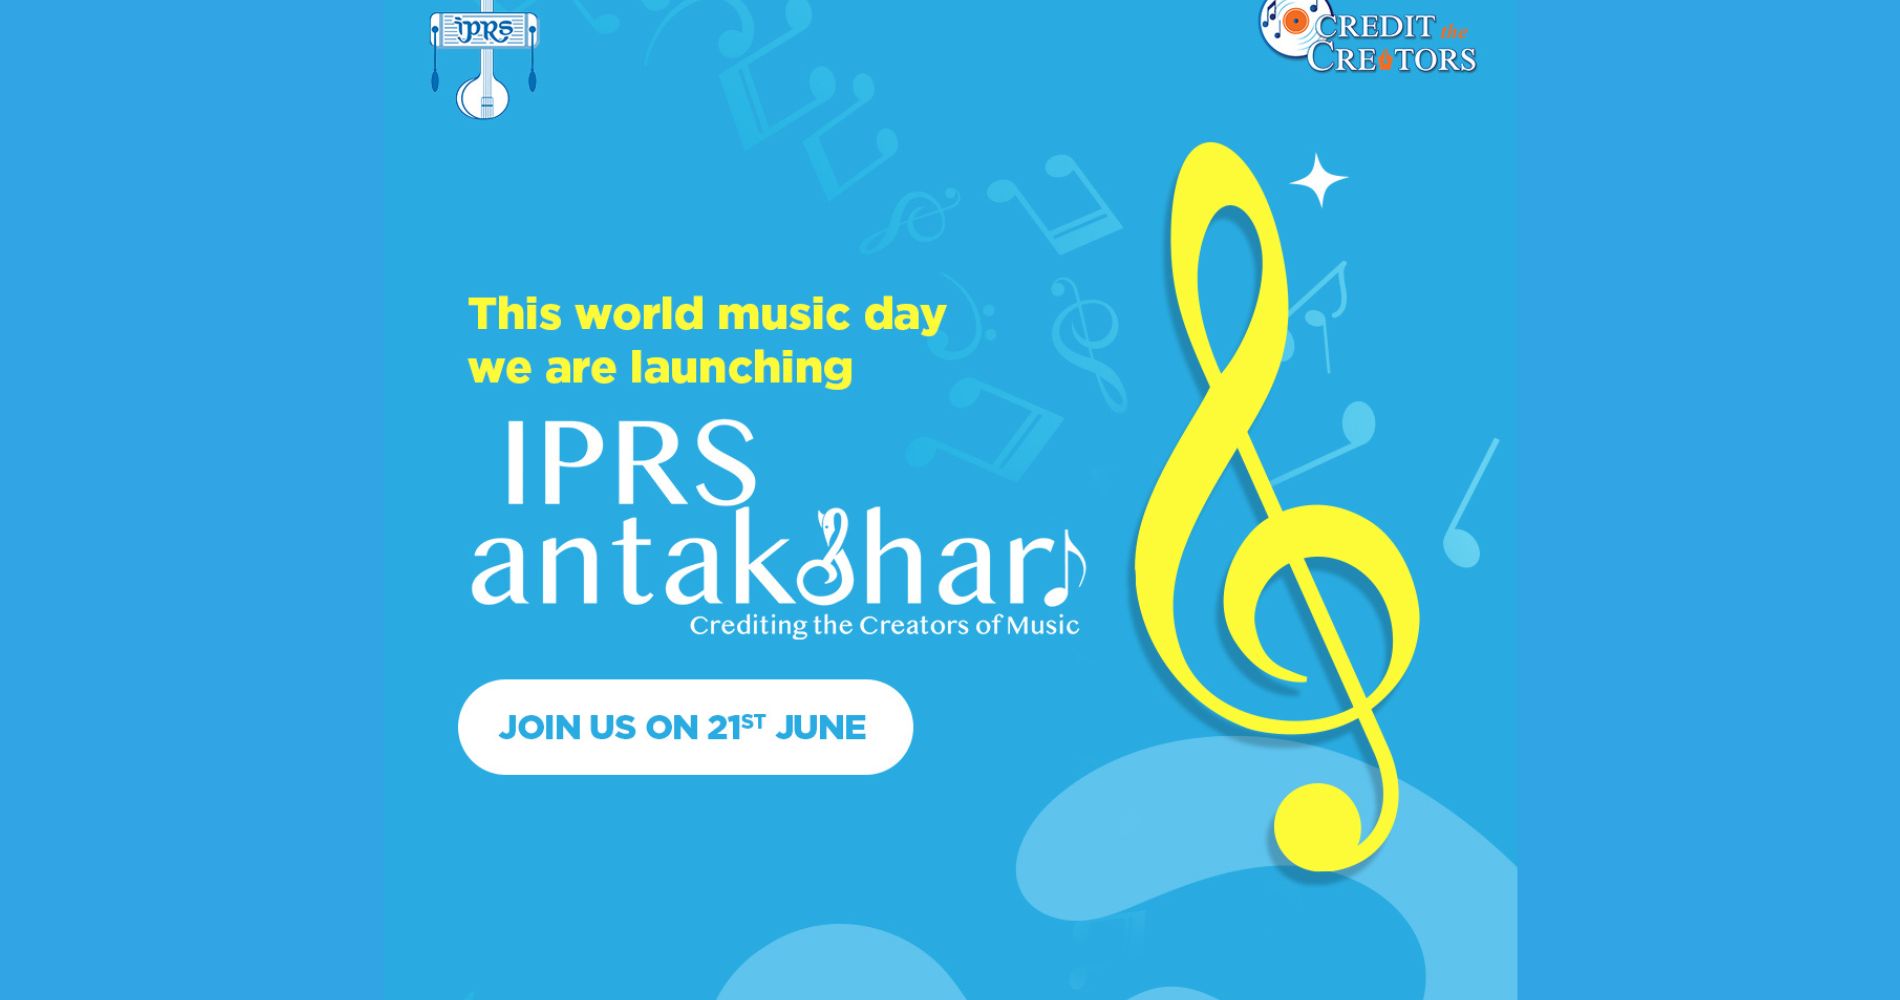 IPRS celebrates our beloved composers and songwriters with ‘IPRS Antakshari’ on Music day